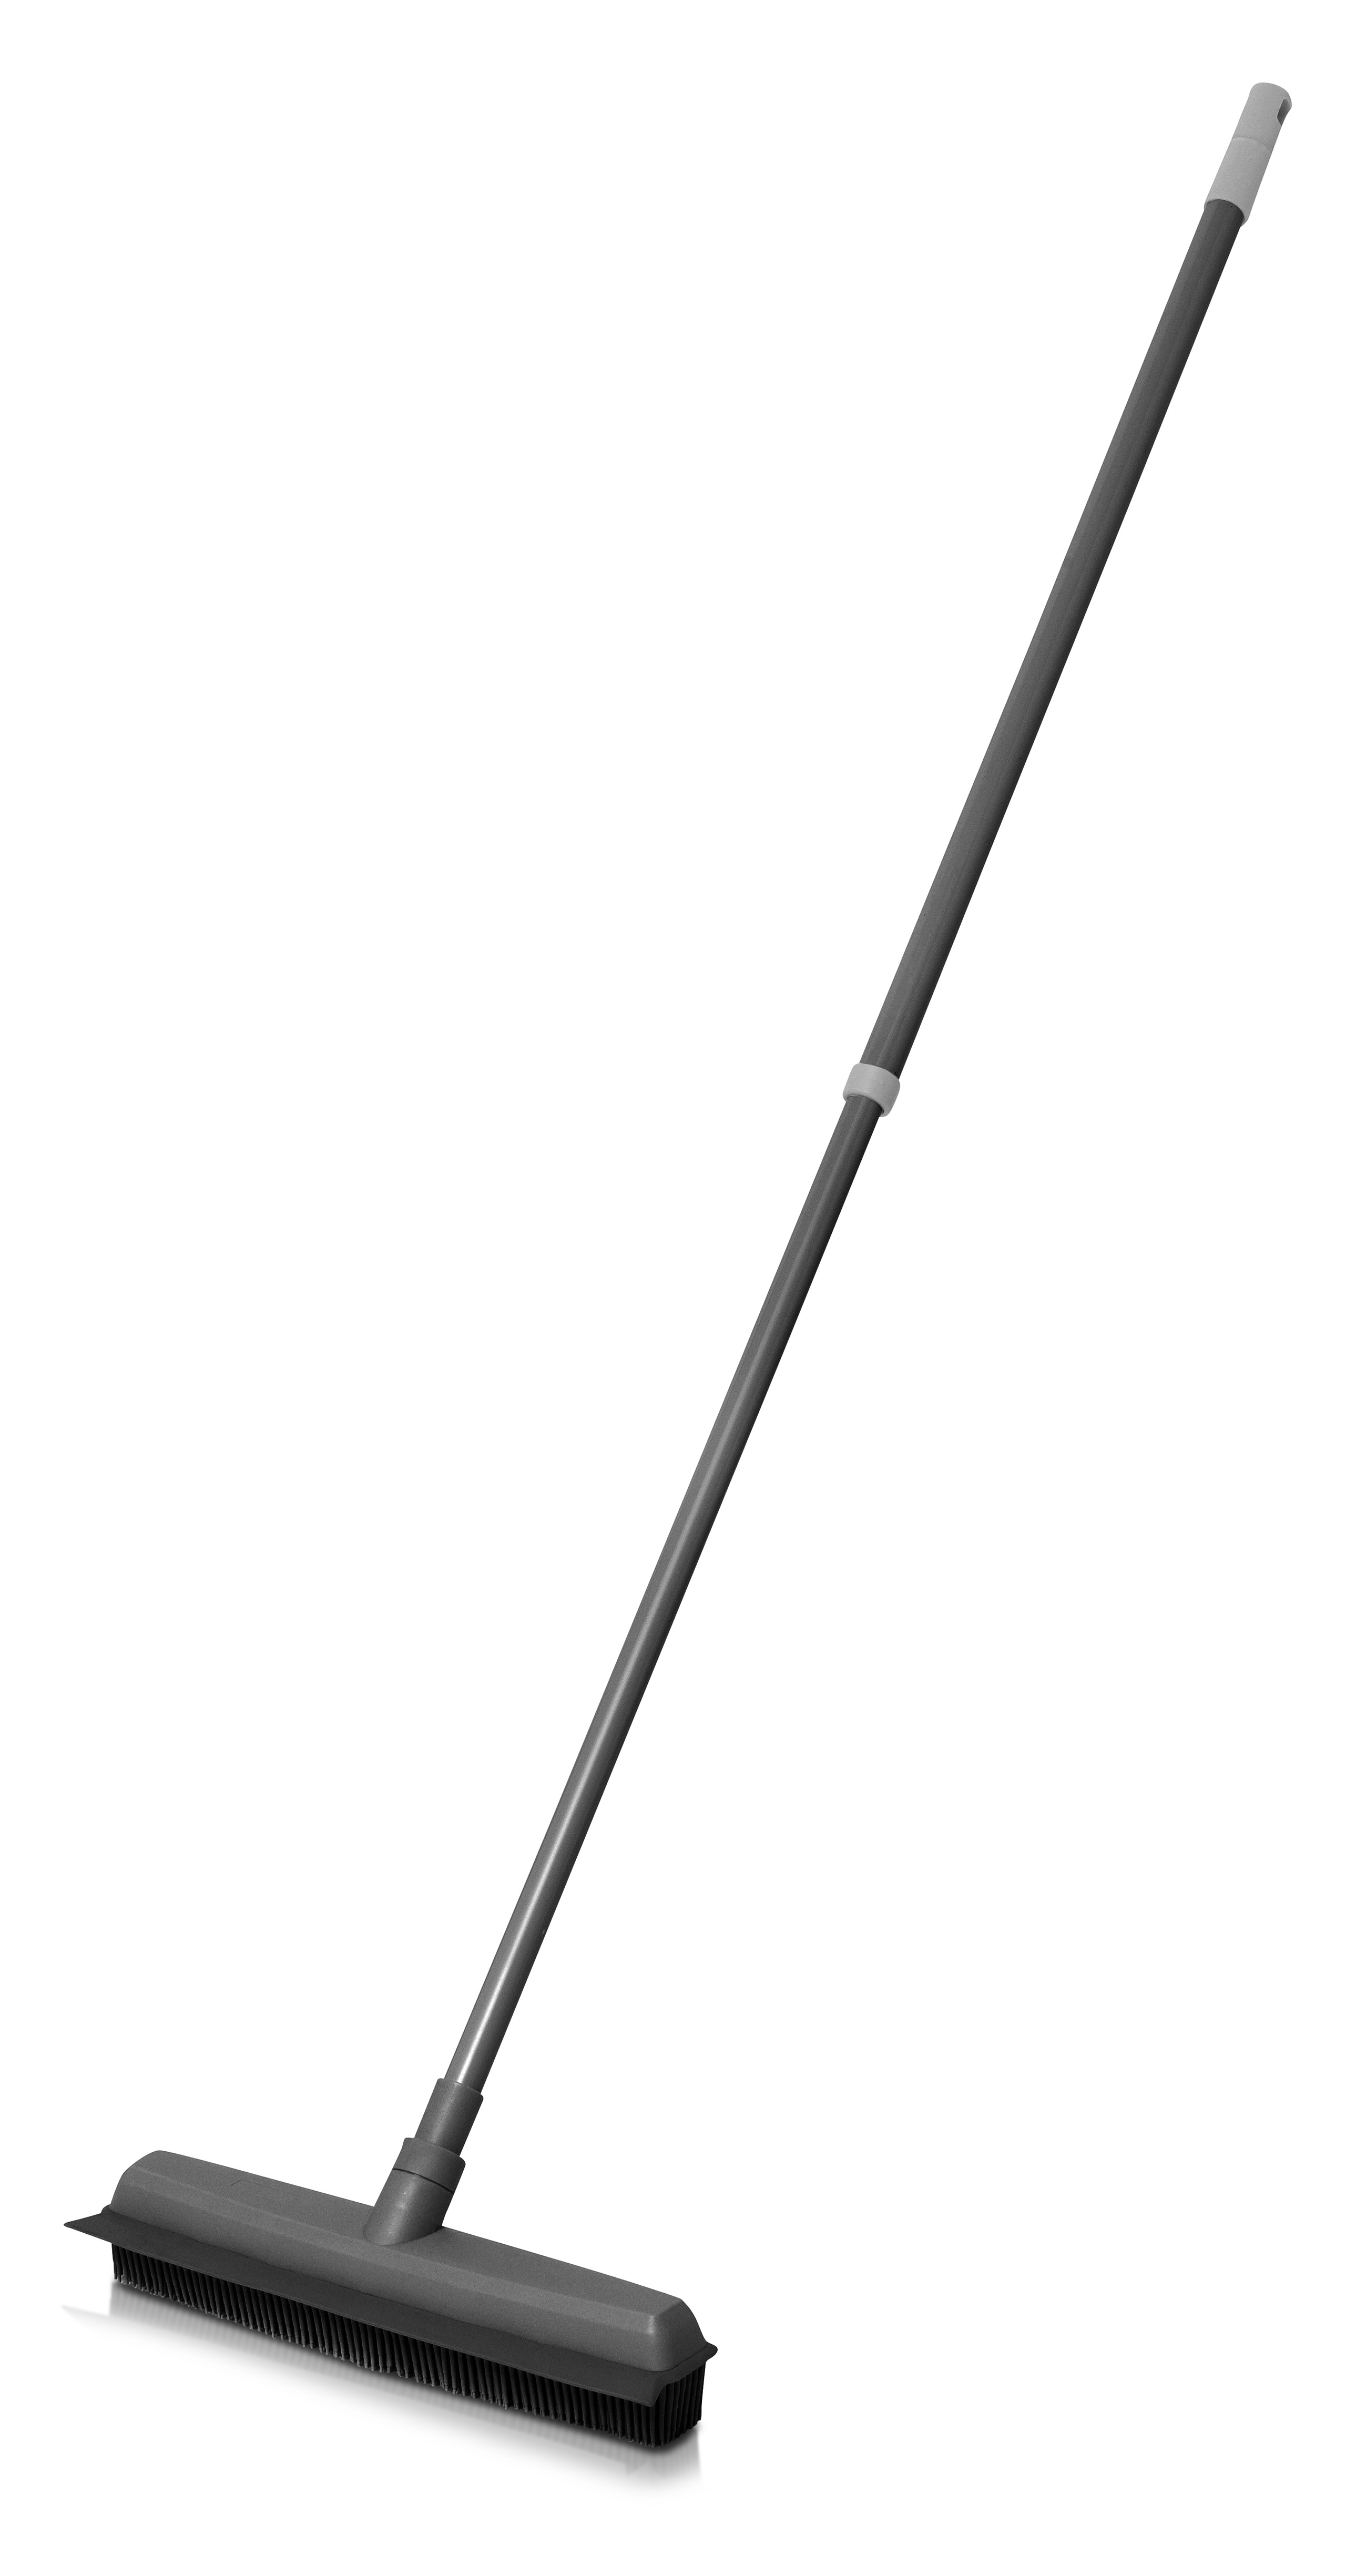 RUBBER BROOM WITH EXT HANDLE 120C